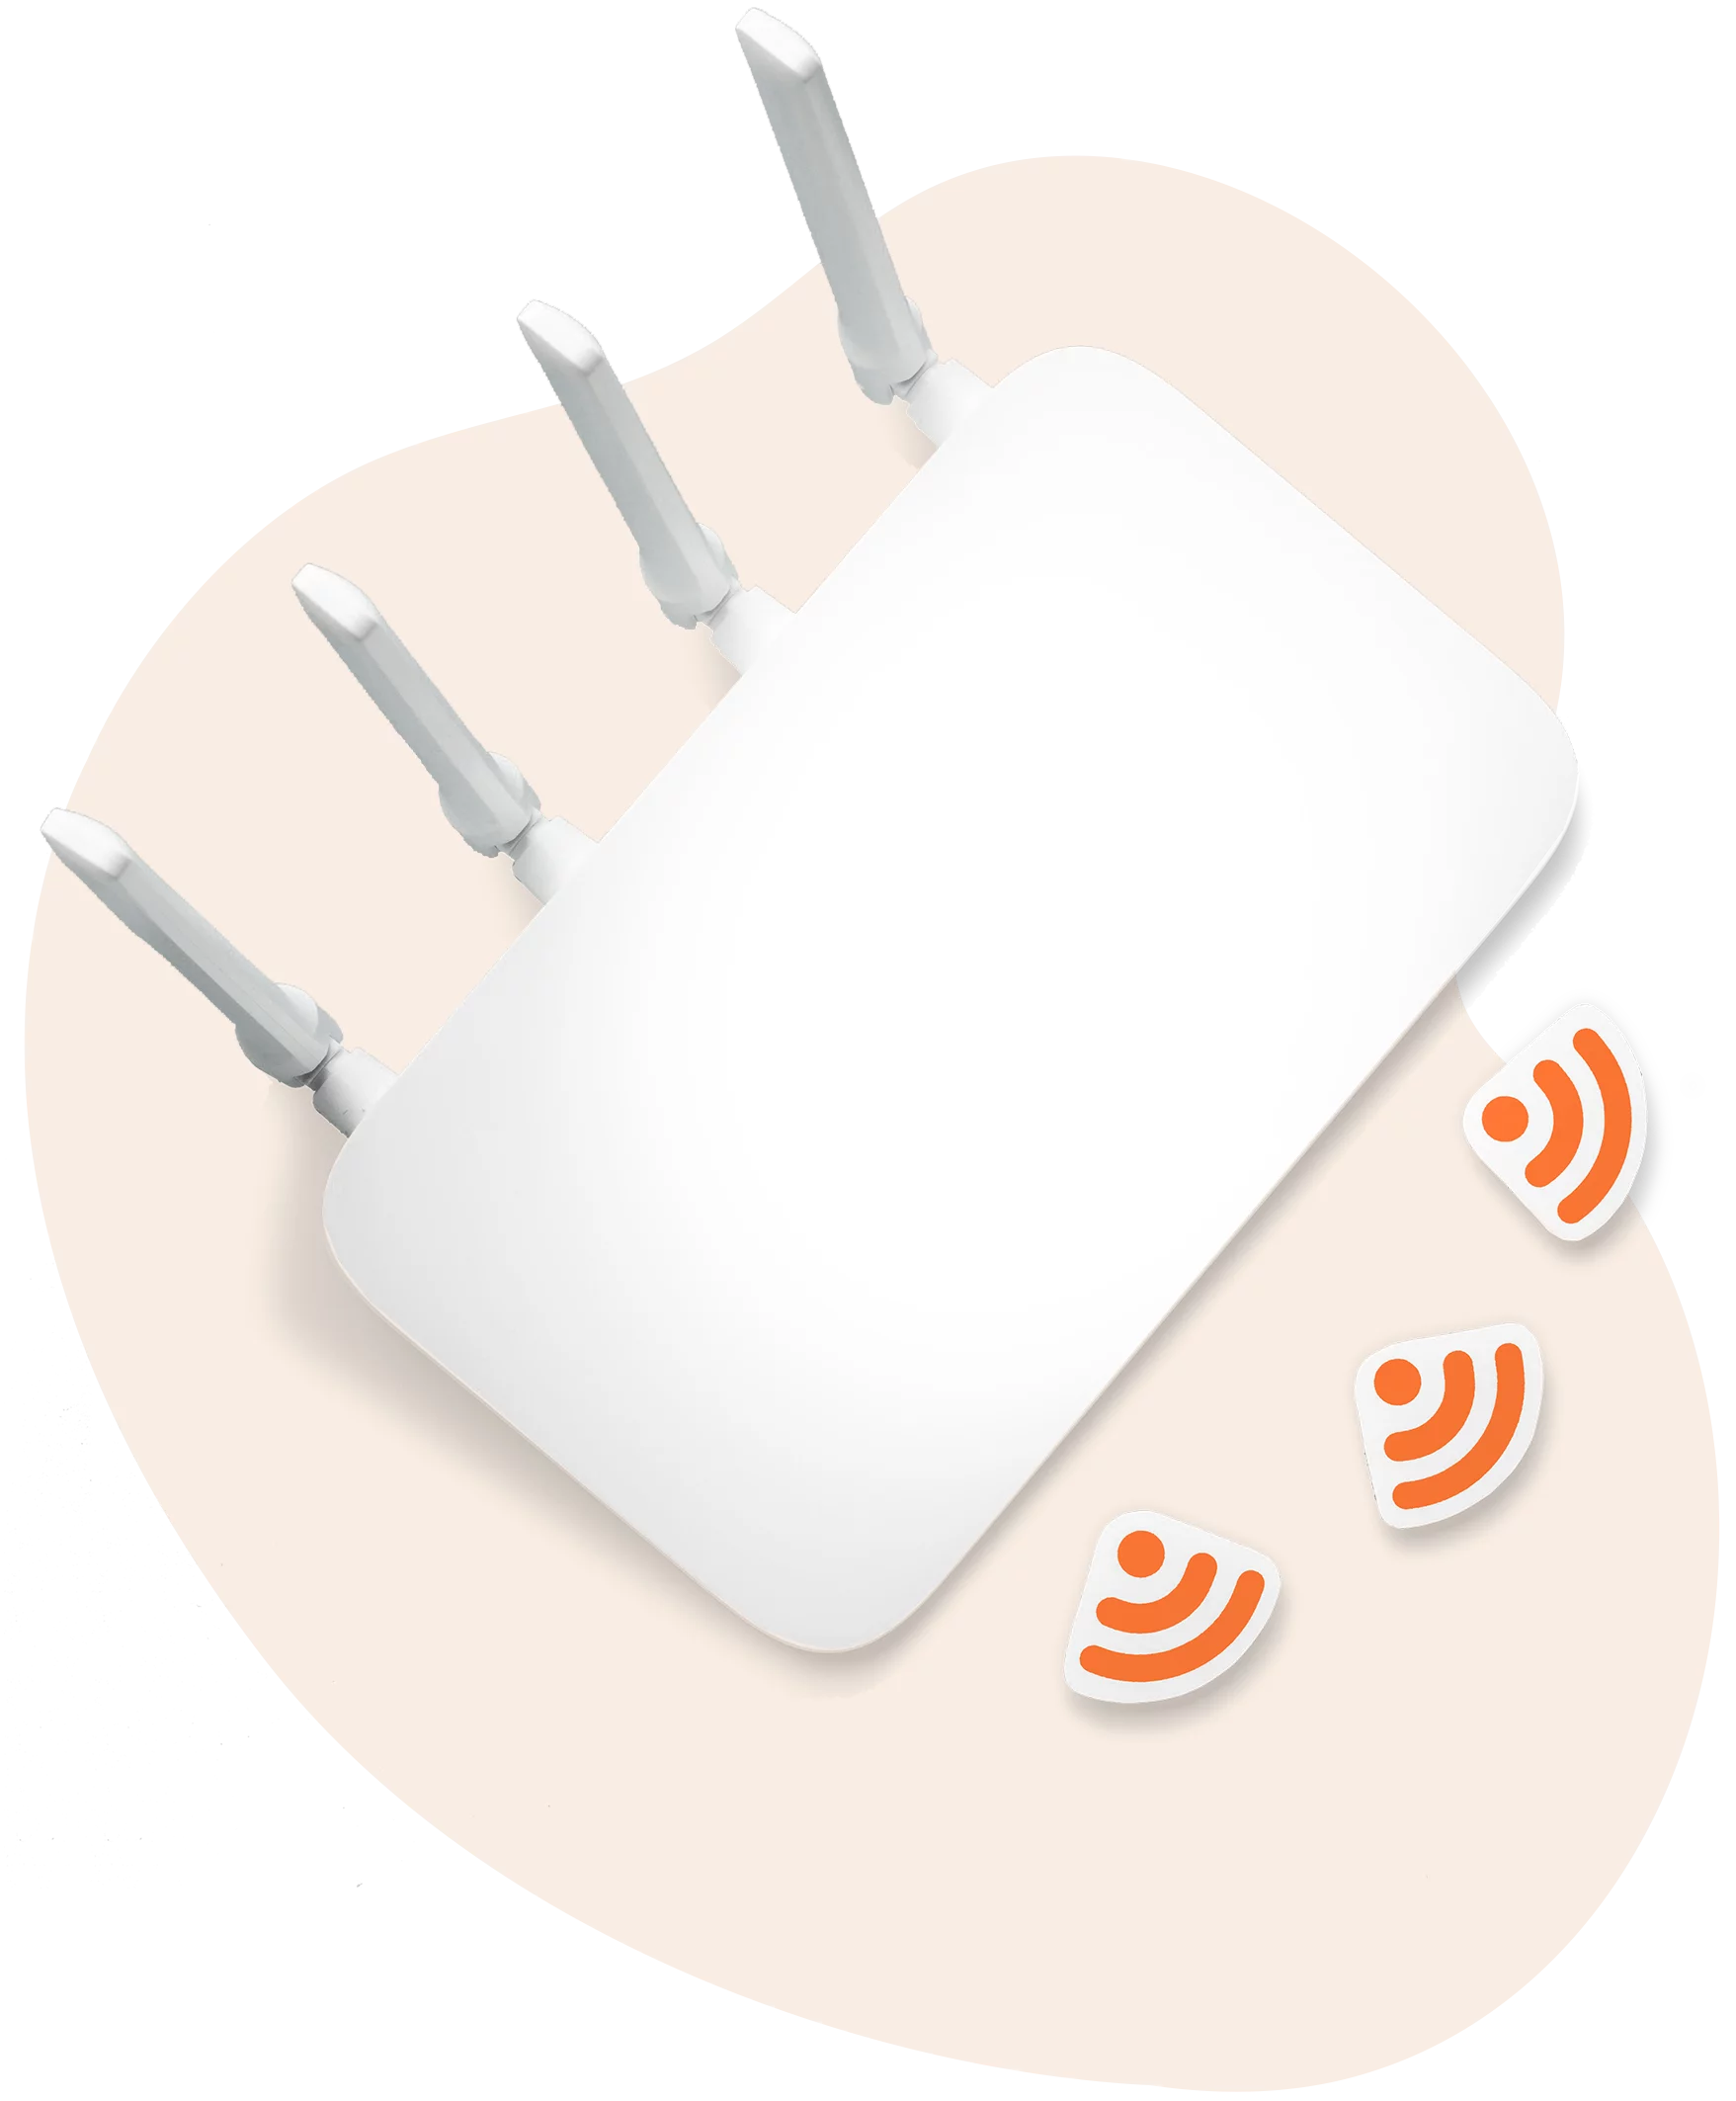 Wifi services